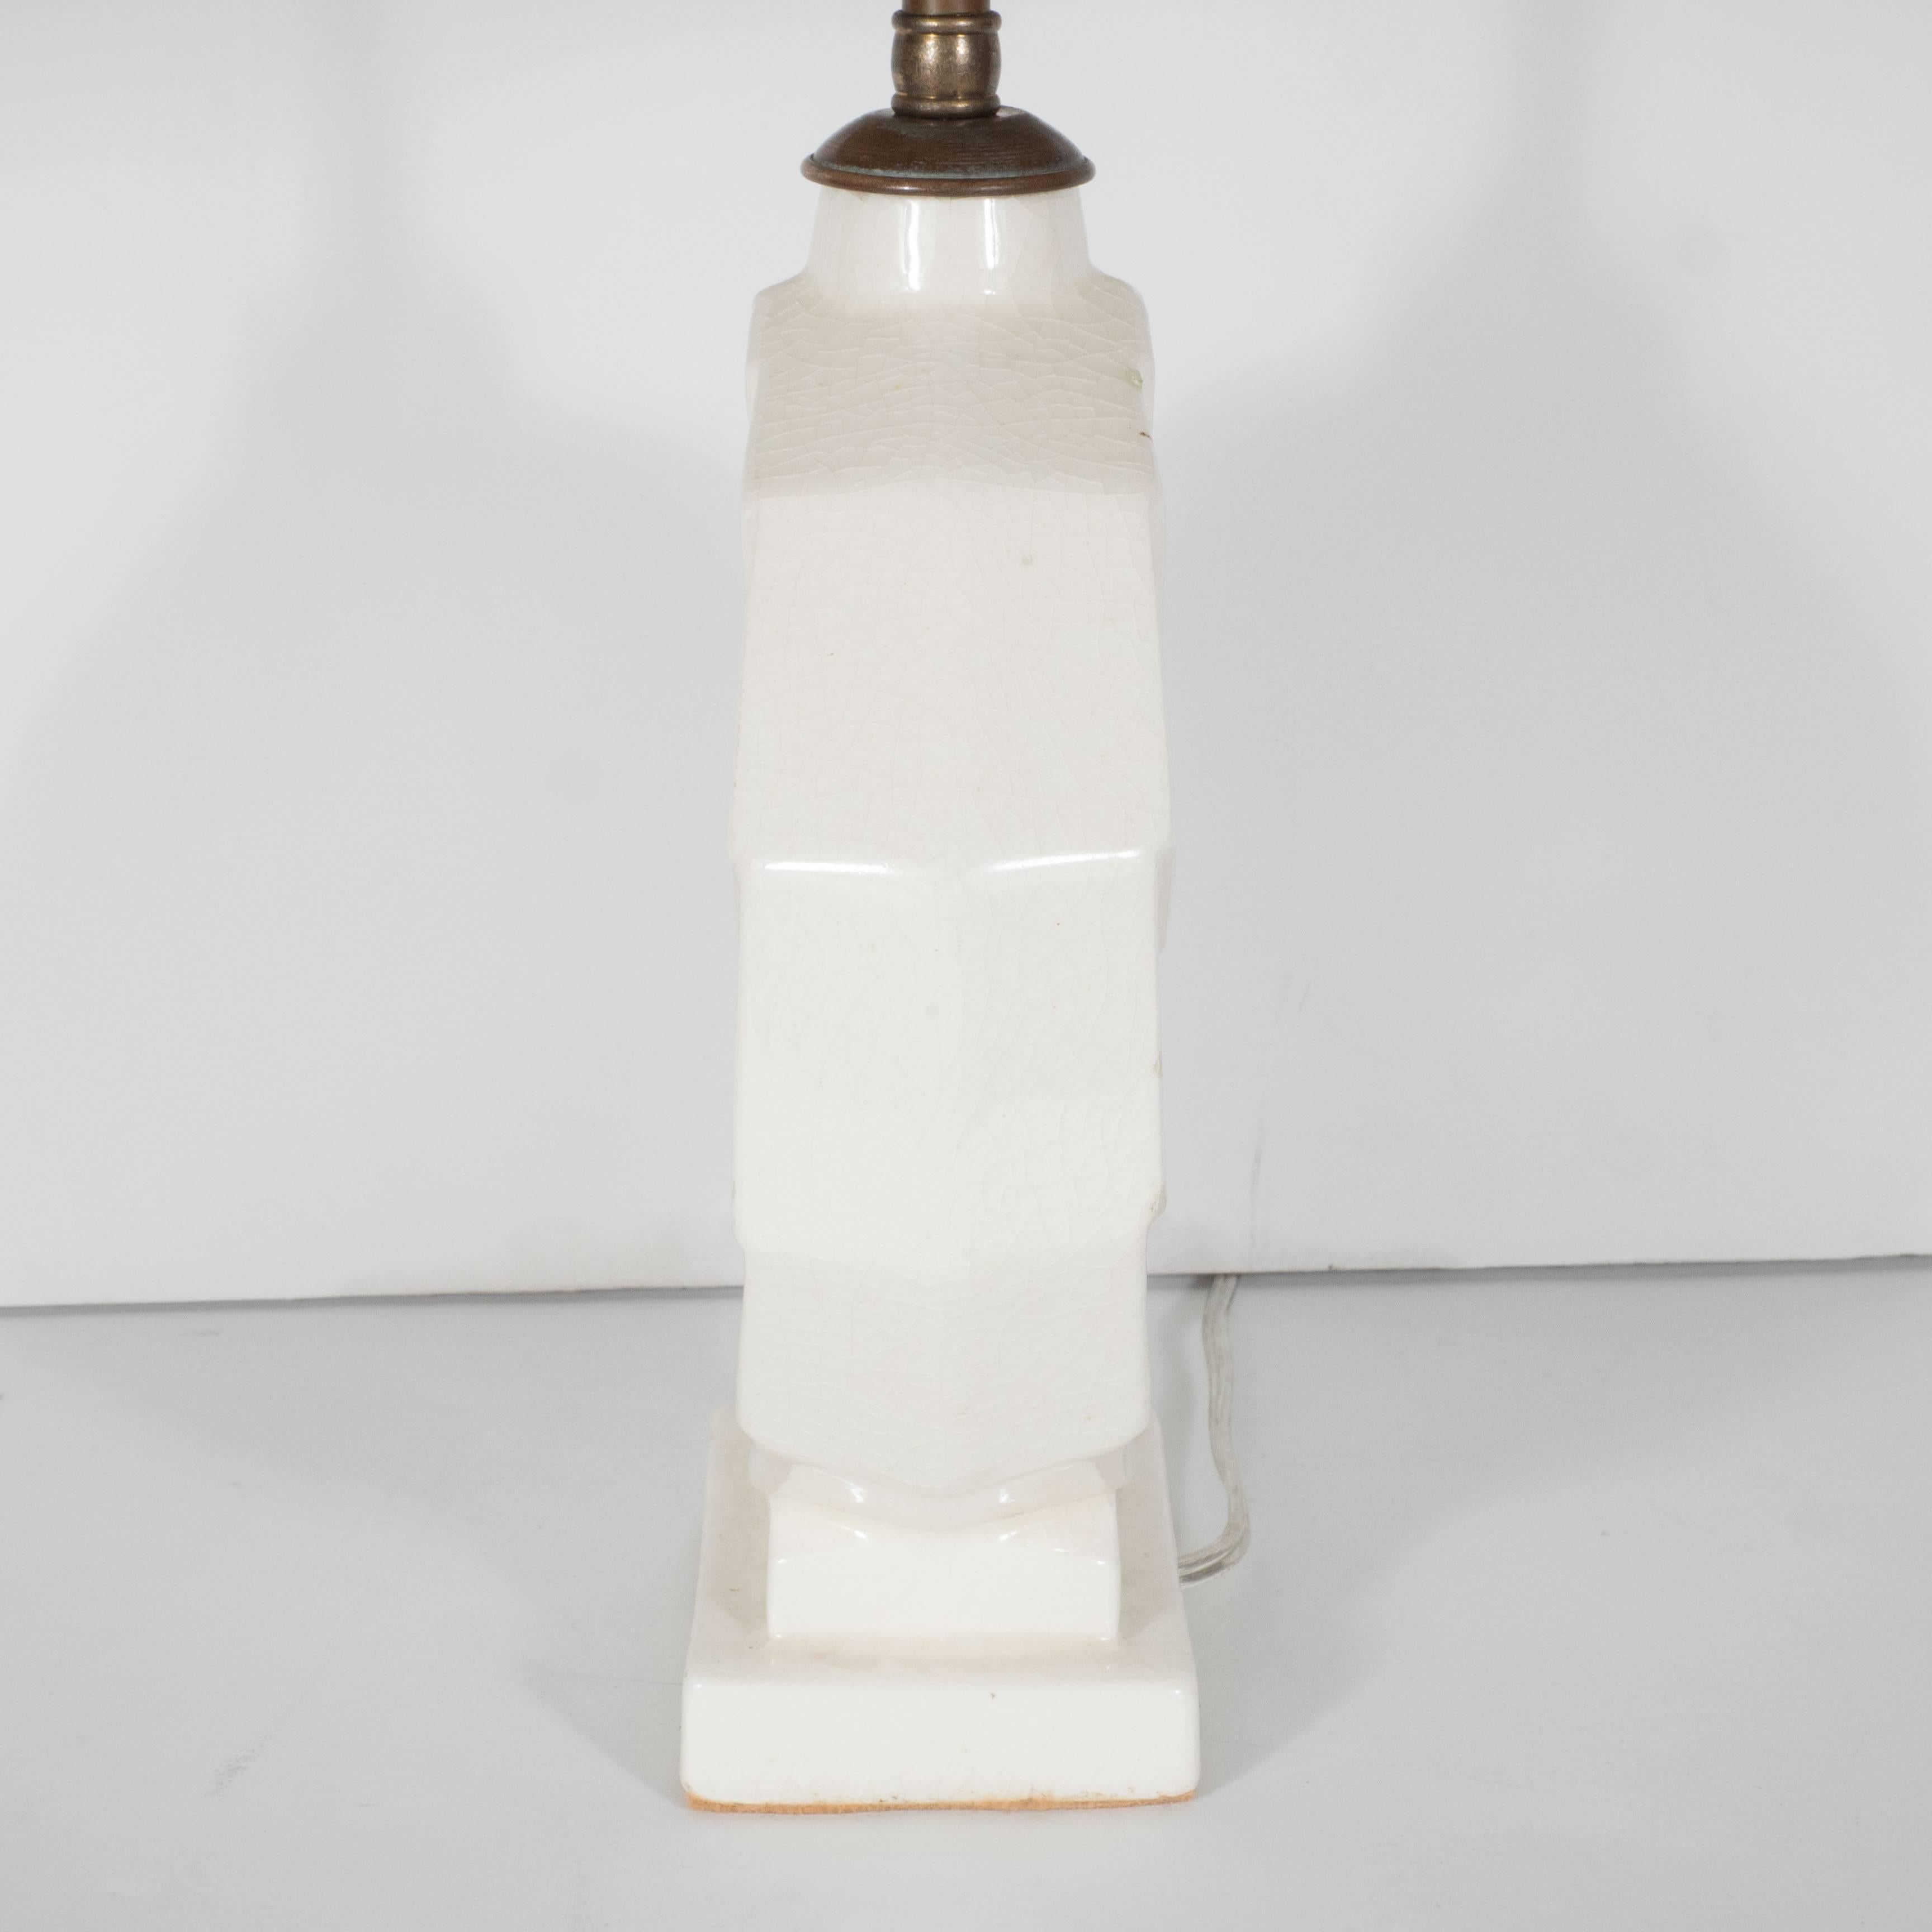 Mid-20th Century French, Art Deco Table Lamp in the Style of Primavera in Crackled Crazed Ceramic